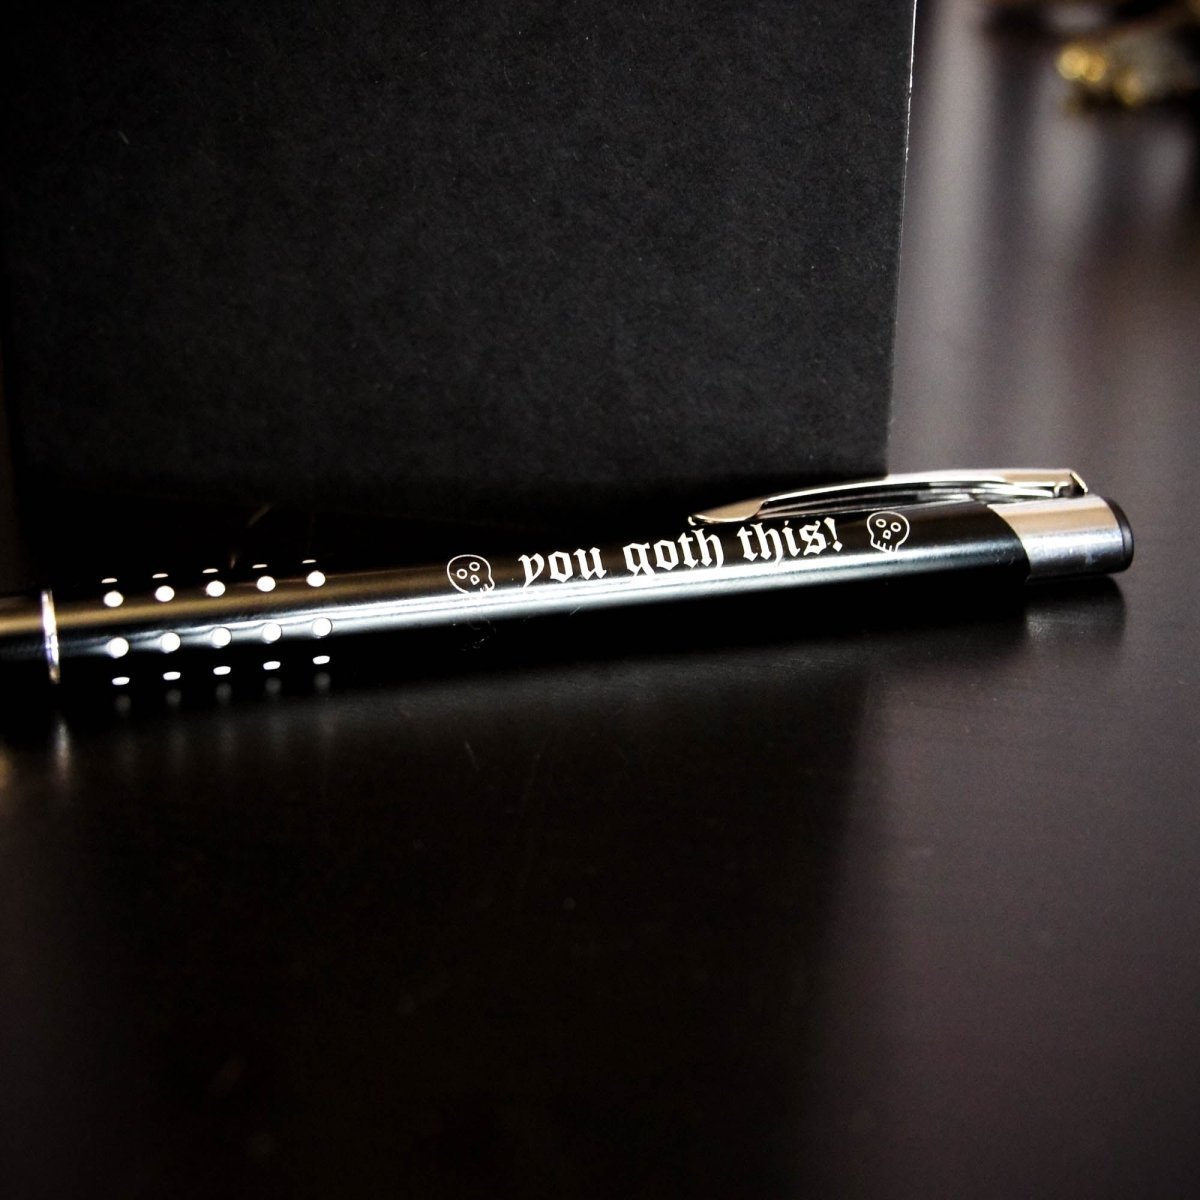 You Goth This Pen - The Gothic Stationery Company - Pen